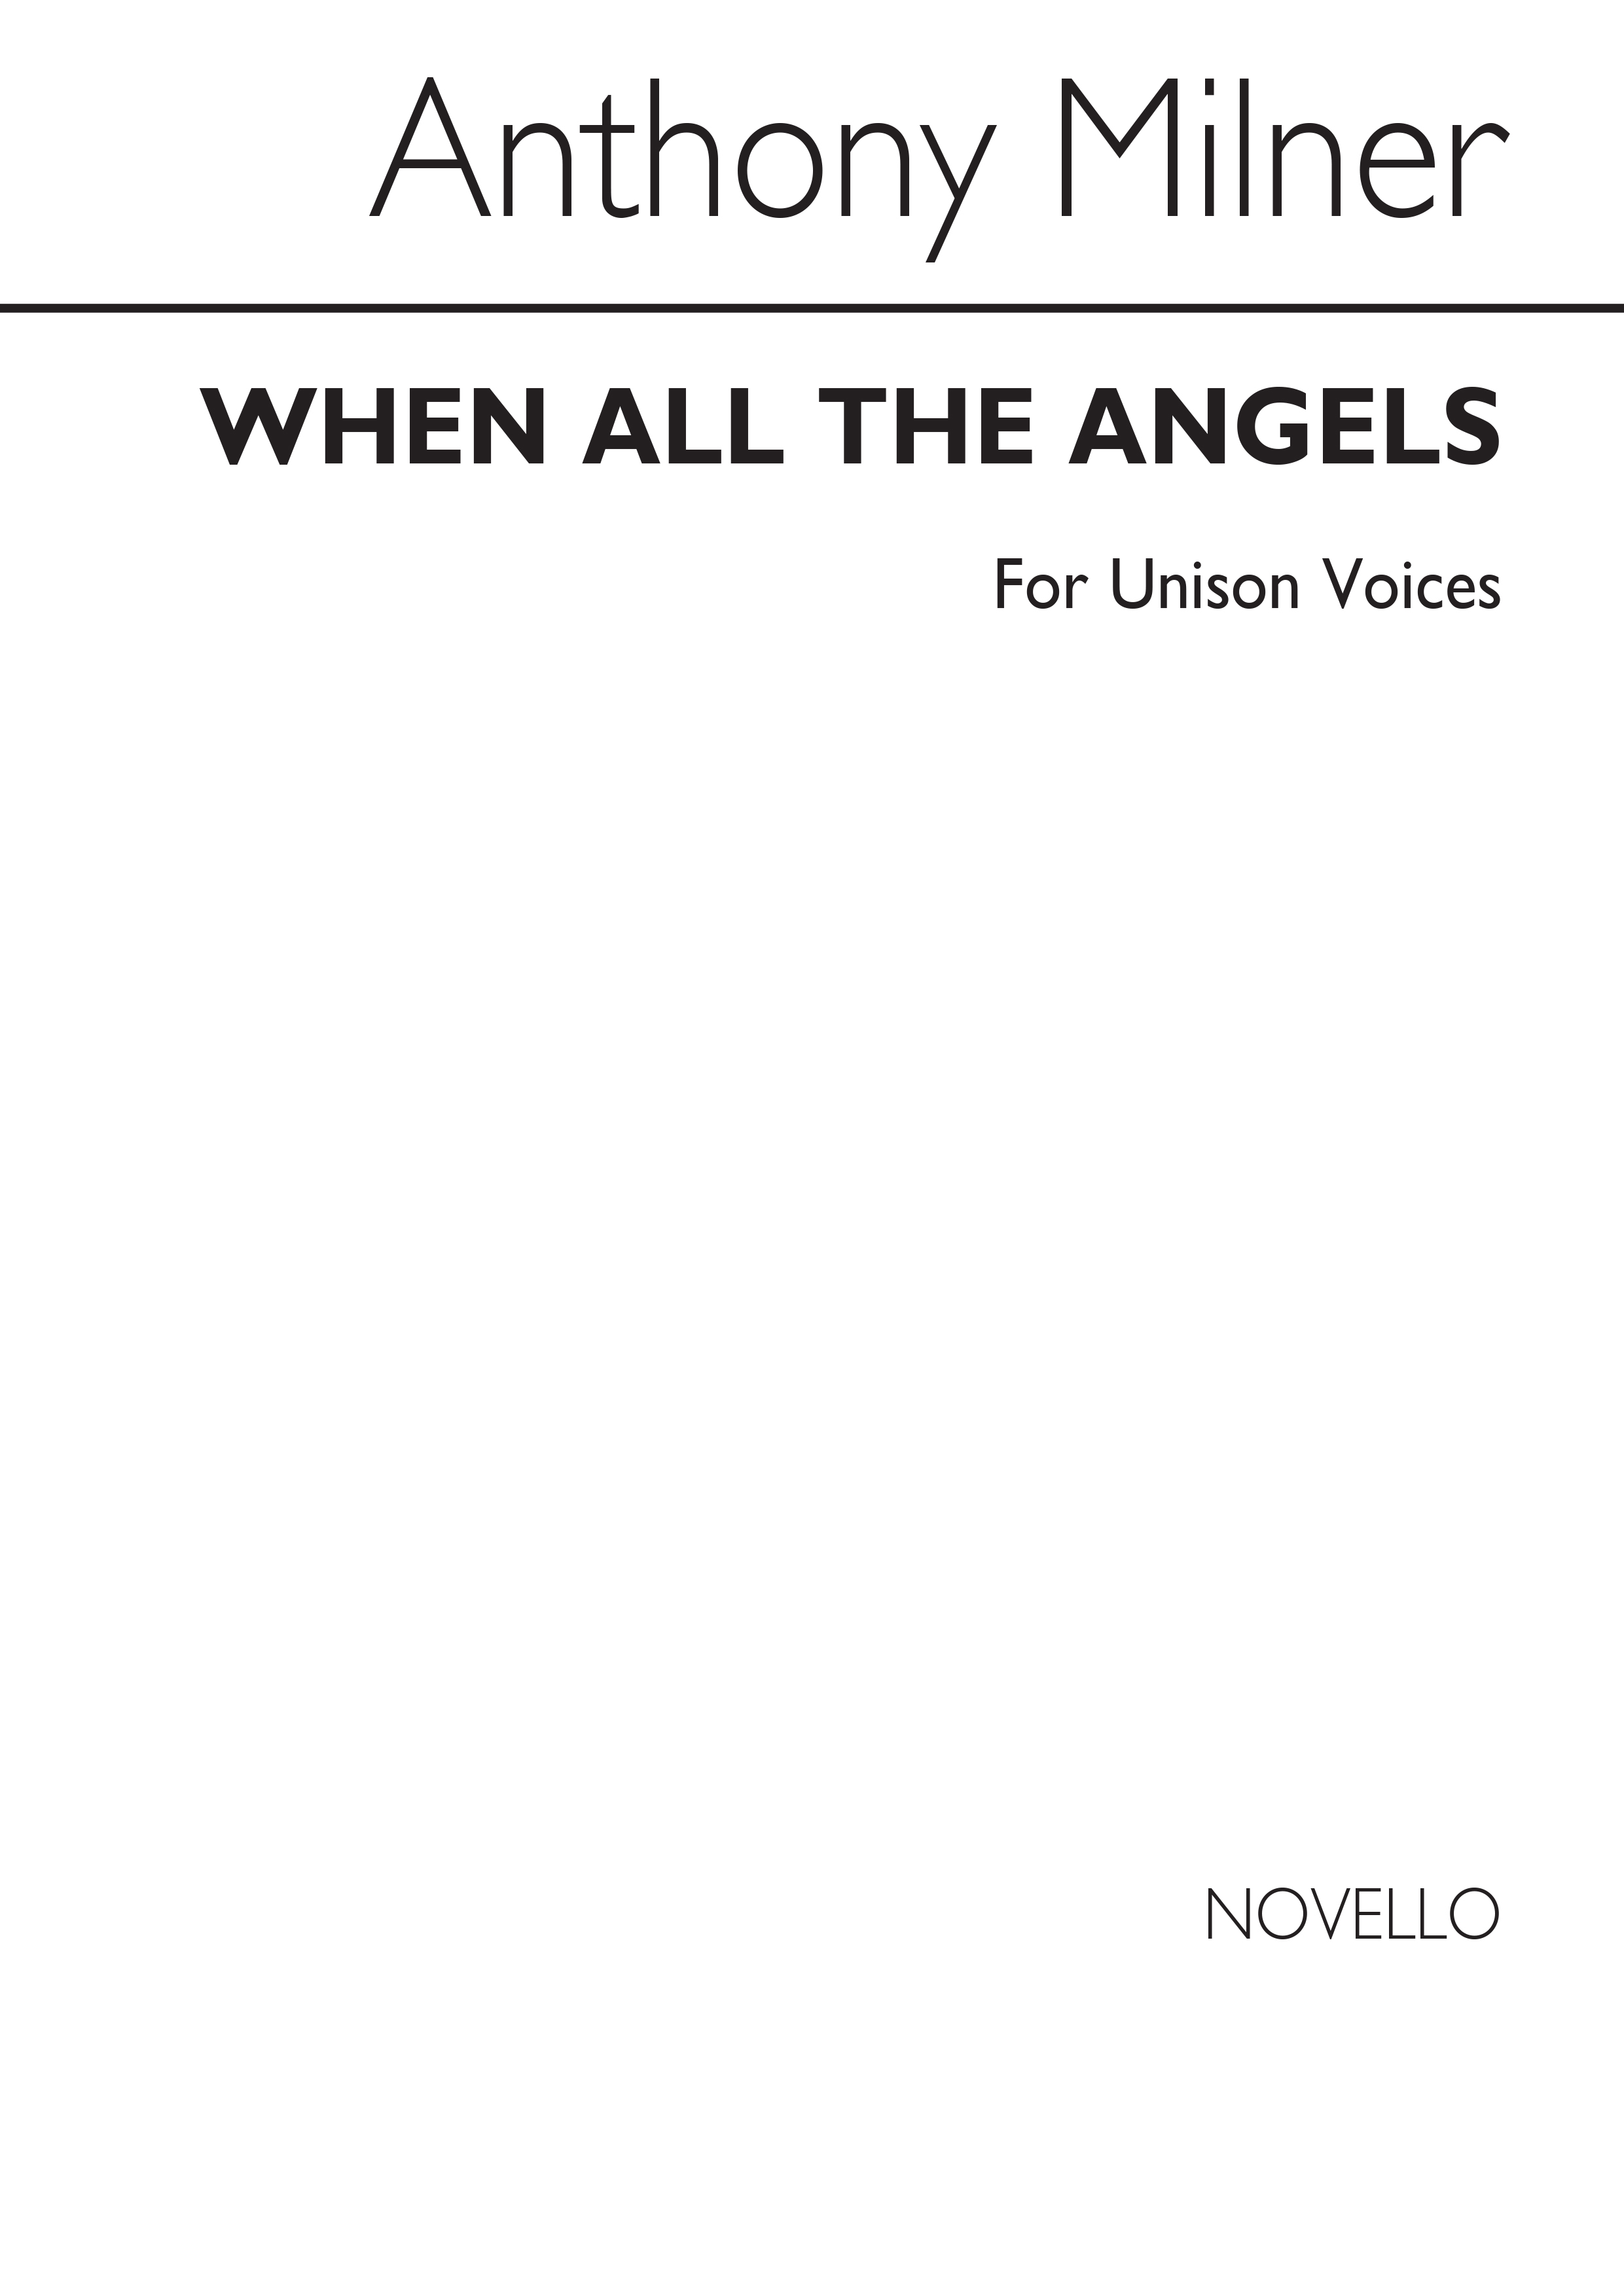 Anthony Milner: When All The Angels